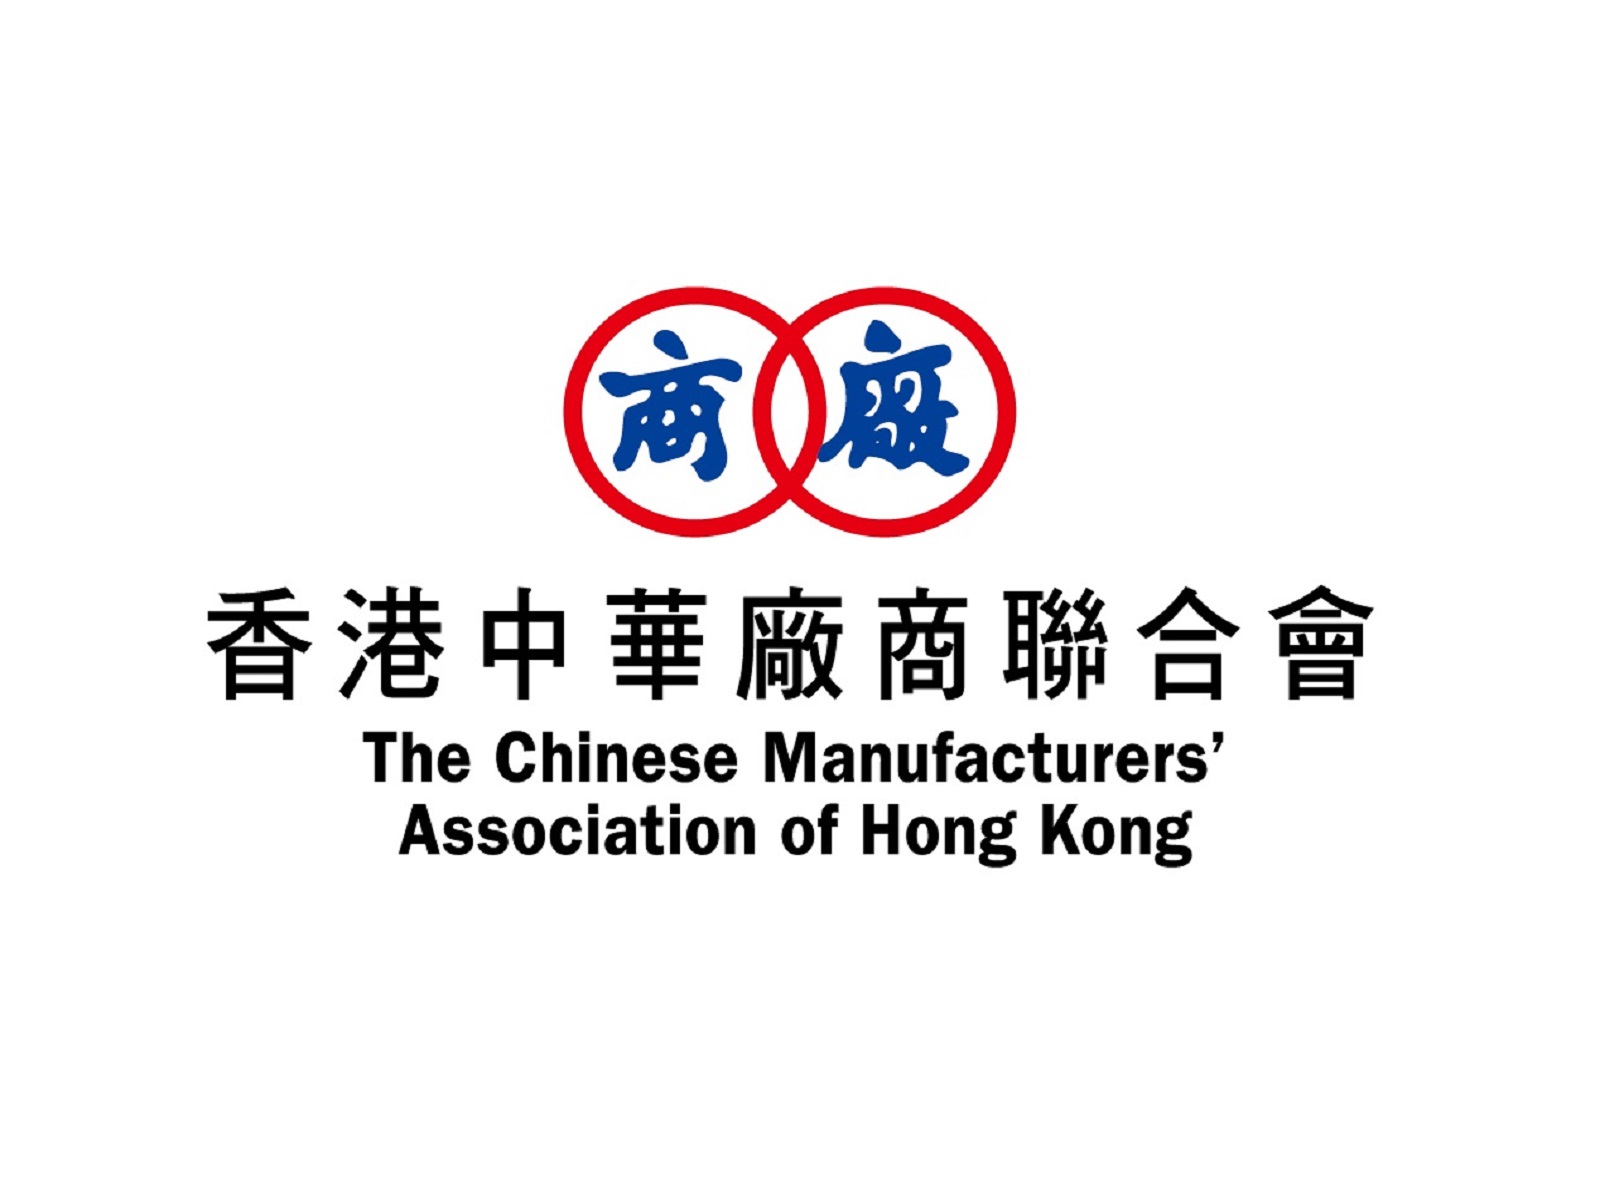 The Chinese Manufacturers’ Association of Hong Kong